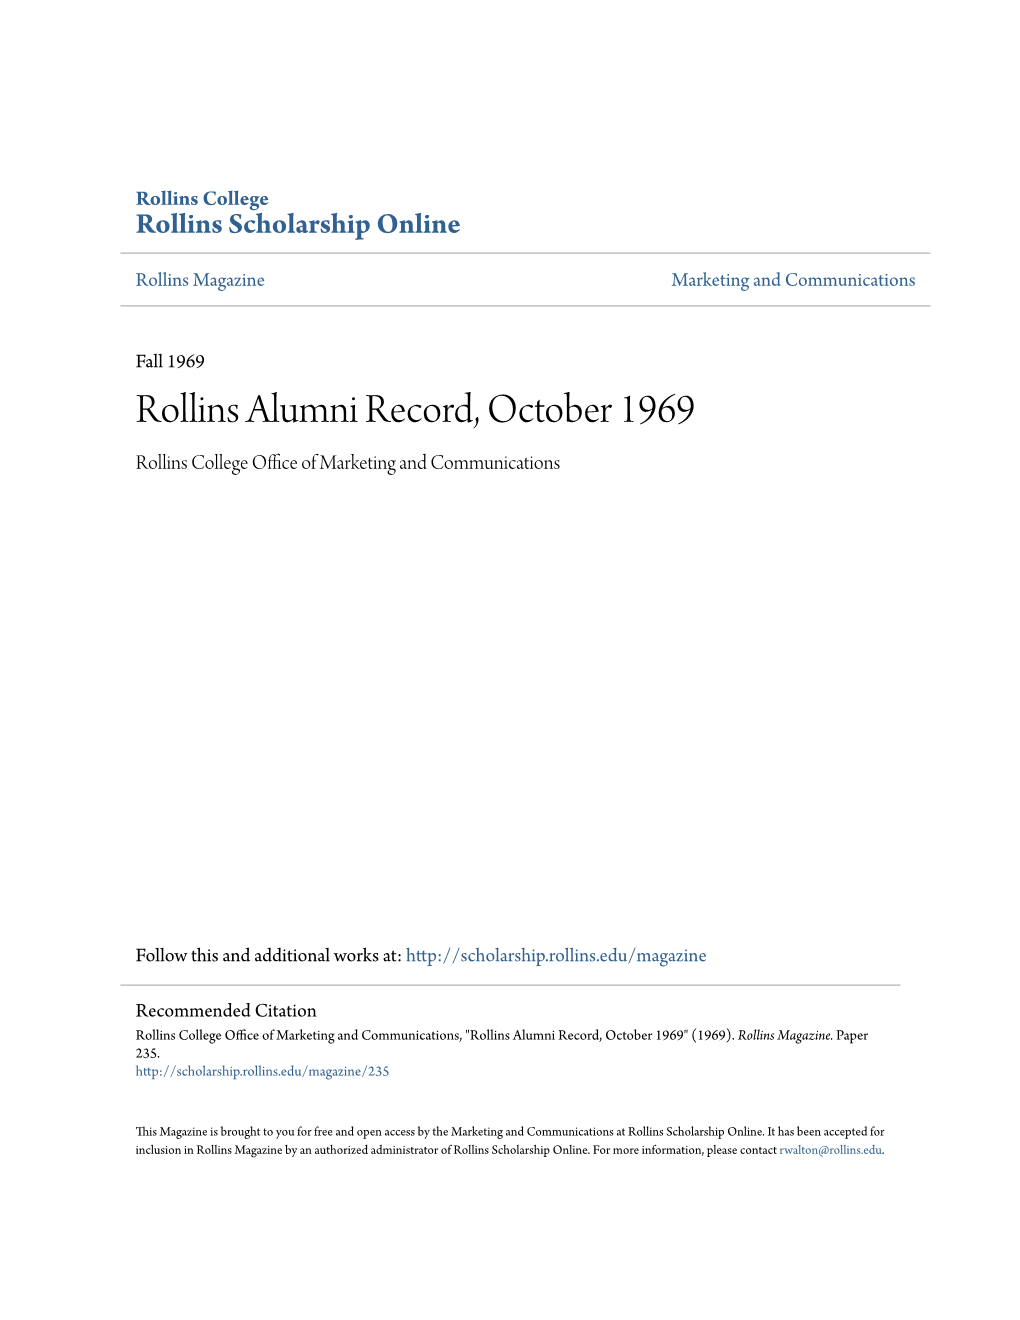 Rollins Alumni Record, October 1969 Rollins College Office Ofa M Rketing and Communications